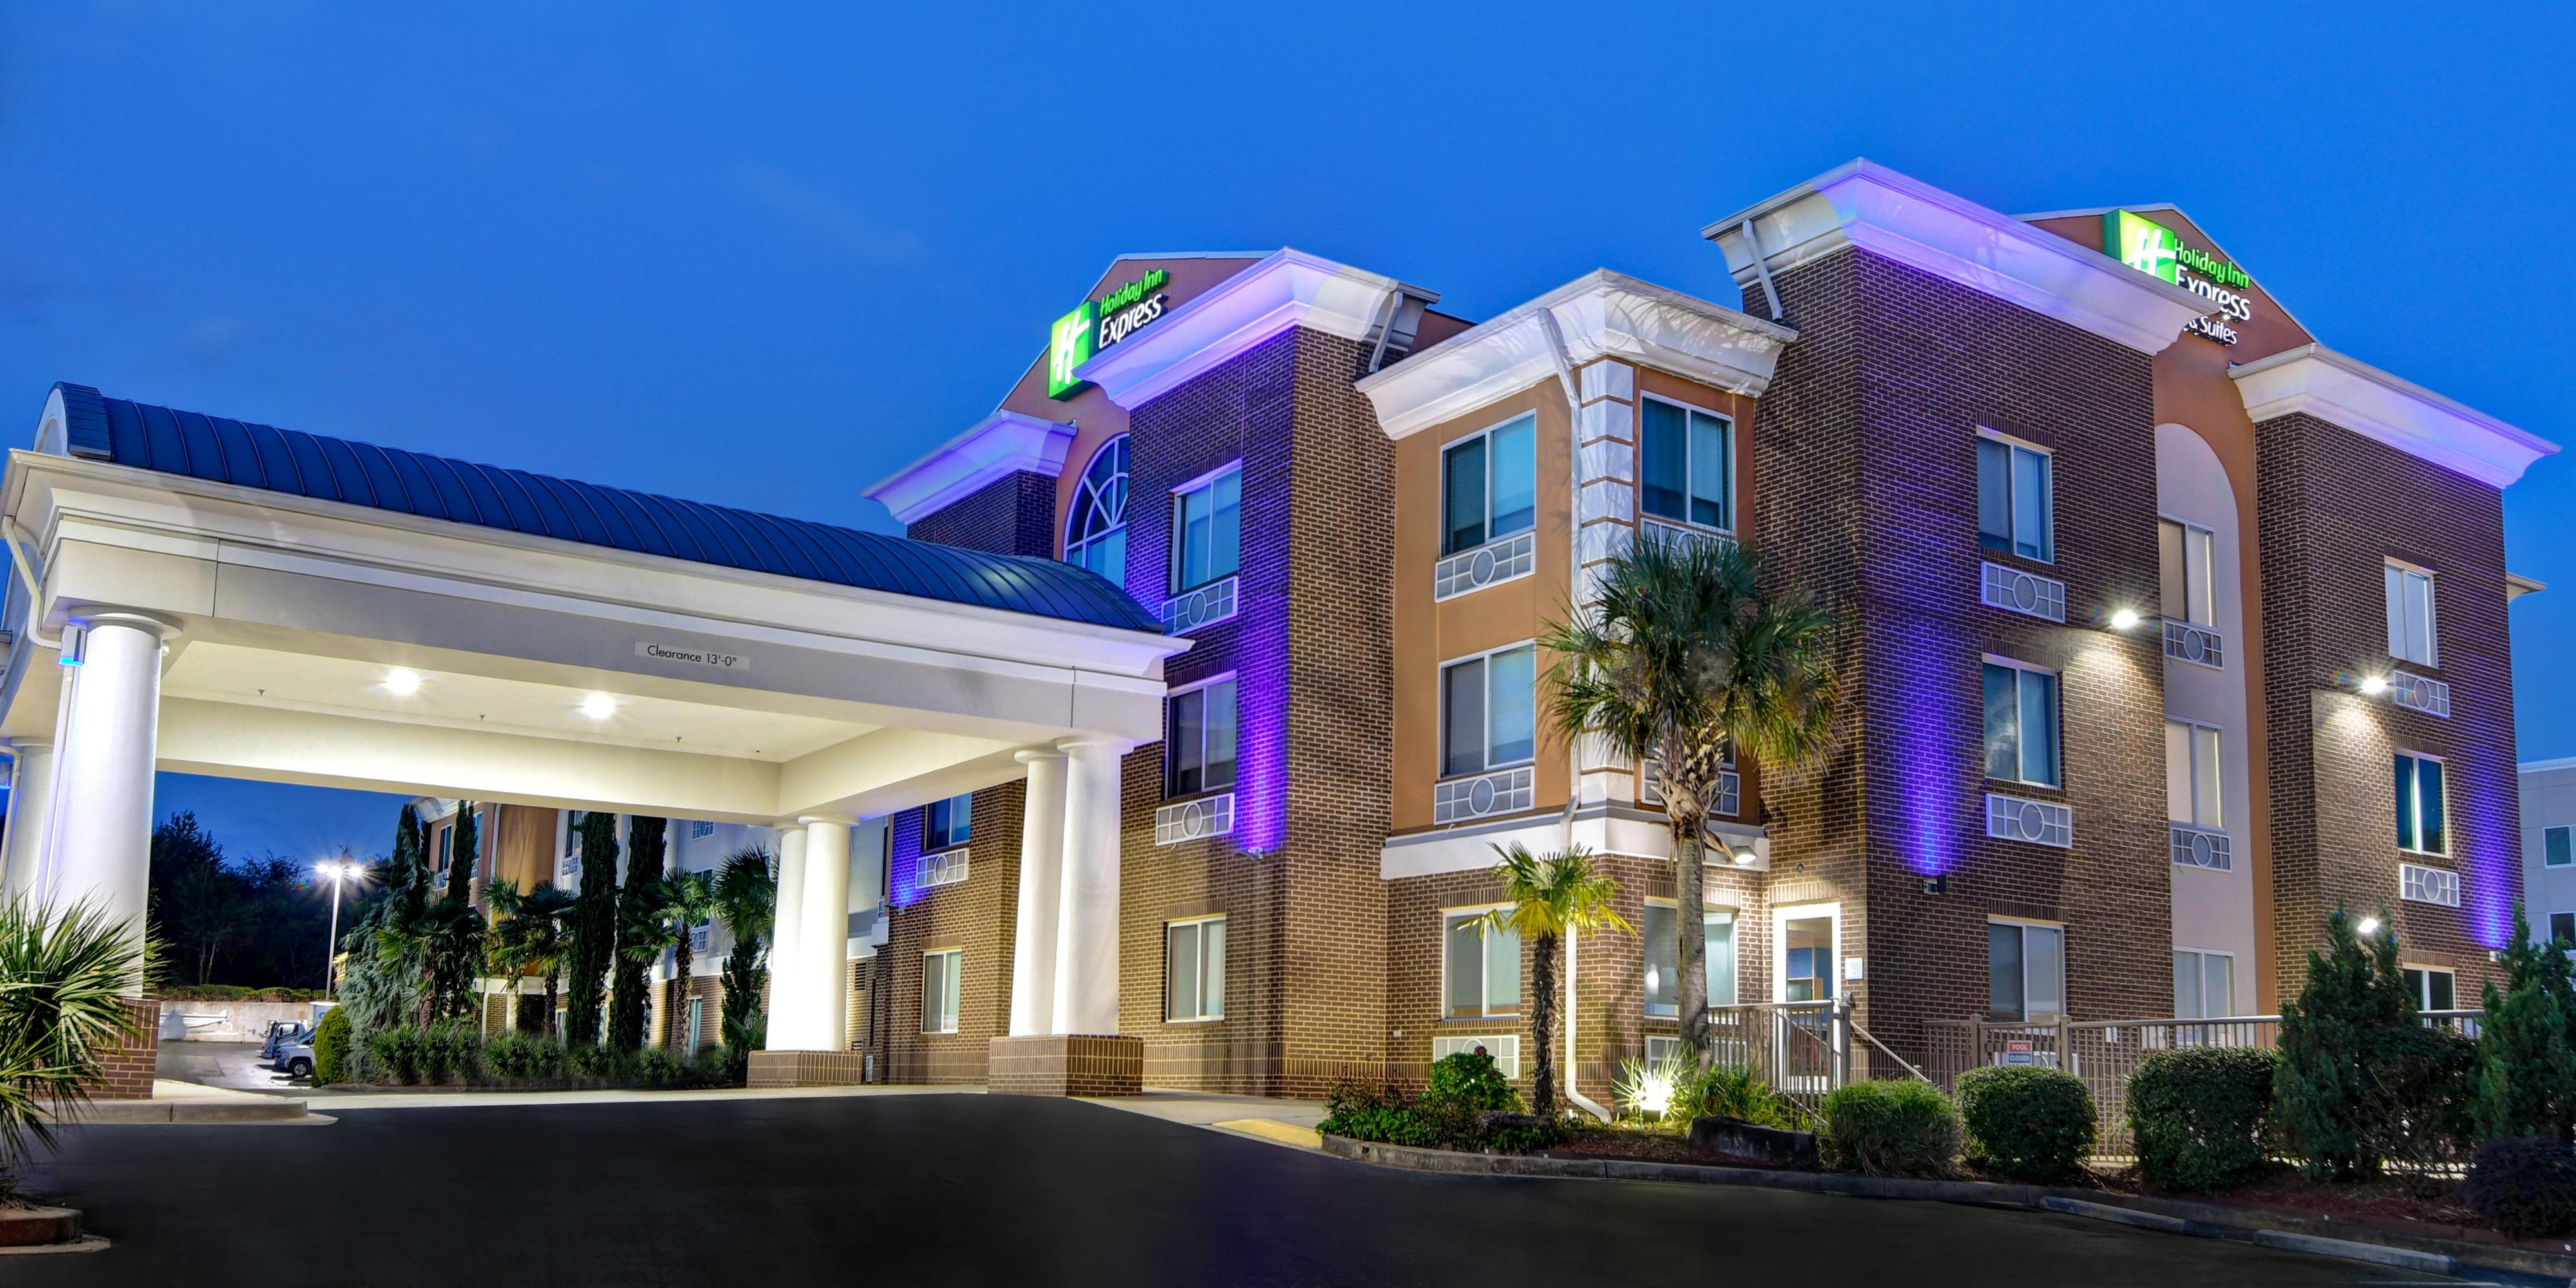 Let's Go Tigers!!!  Our newly renovated hotel is located less than 15mins away from Clemson University.  Great location when touring, attending games, graduation, etc.  